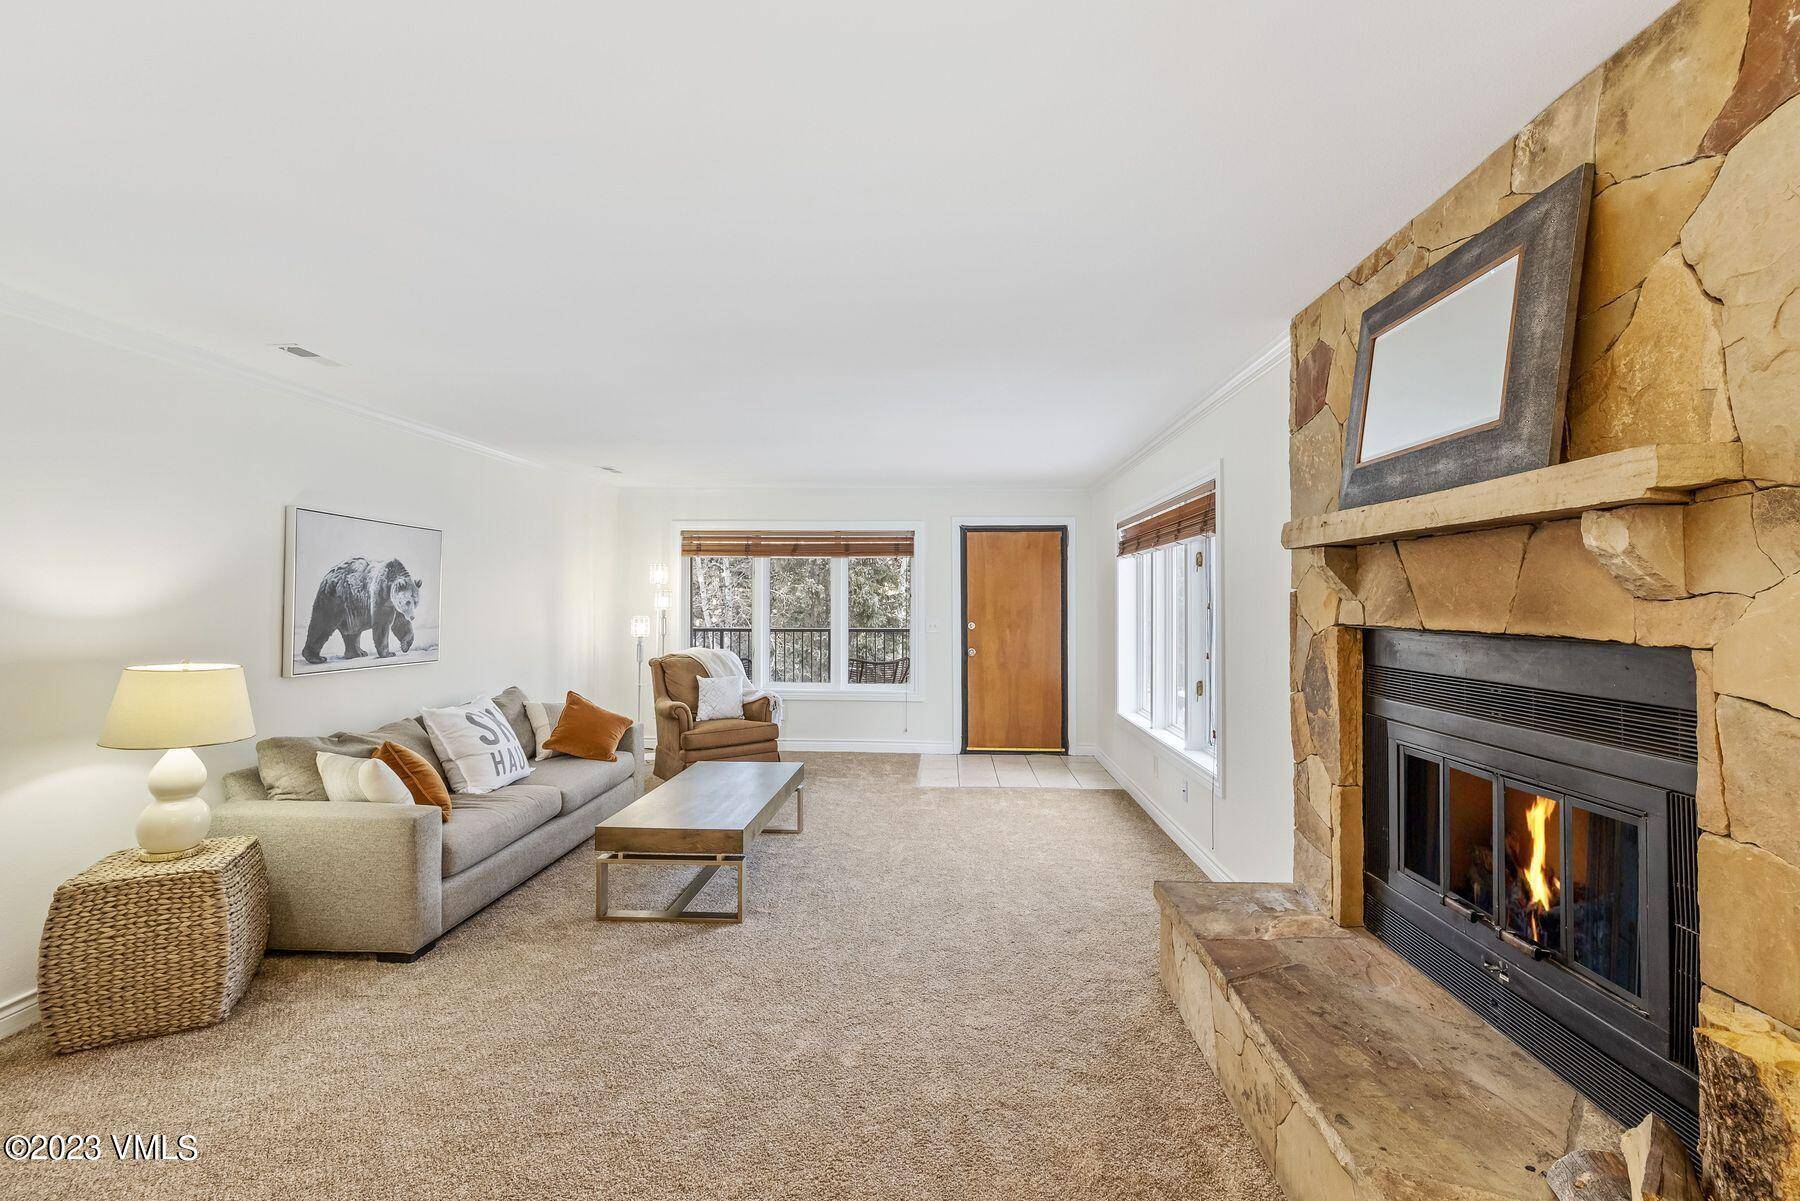 Just minutes away from the gates of Beaver Creek and their convenient ski shuttles, this 3 bedroom, 3 bathroom condo presents an open and expansive one level floor plan that ...